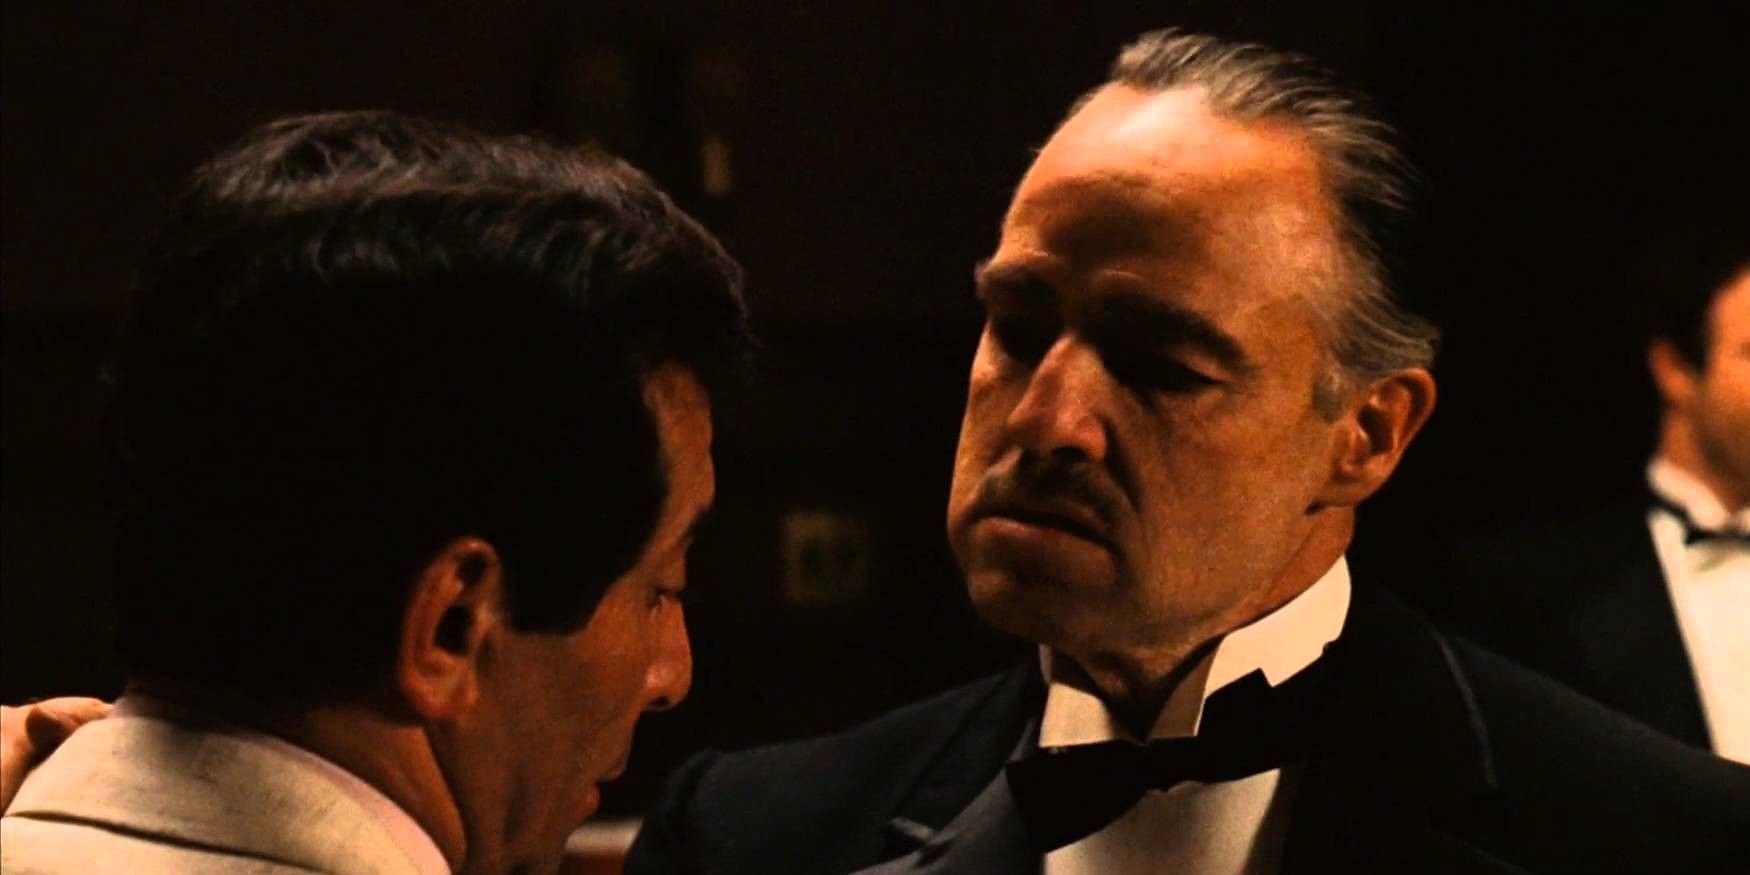 Vito promises to take care of Johnny Fontanes Hollywood problem in The Godfather